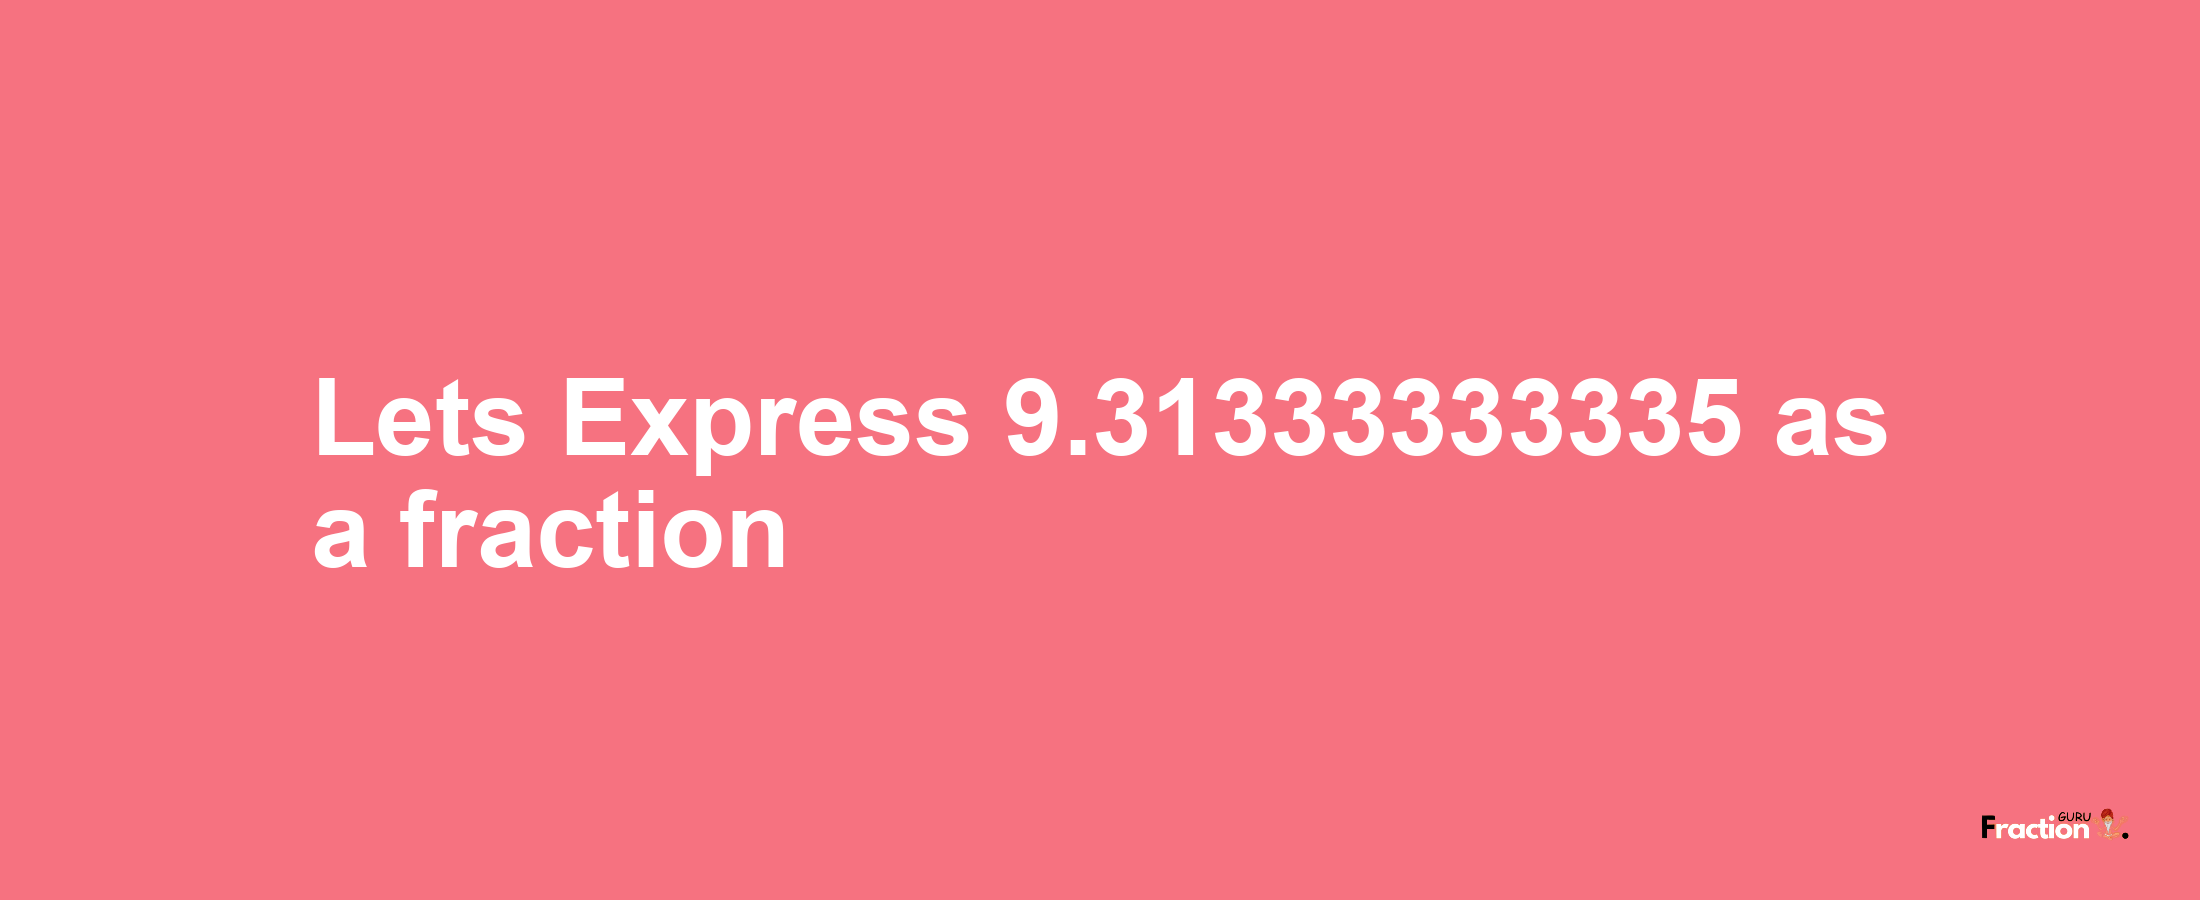 Lets Express 9.31333333335 as afraction